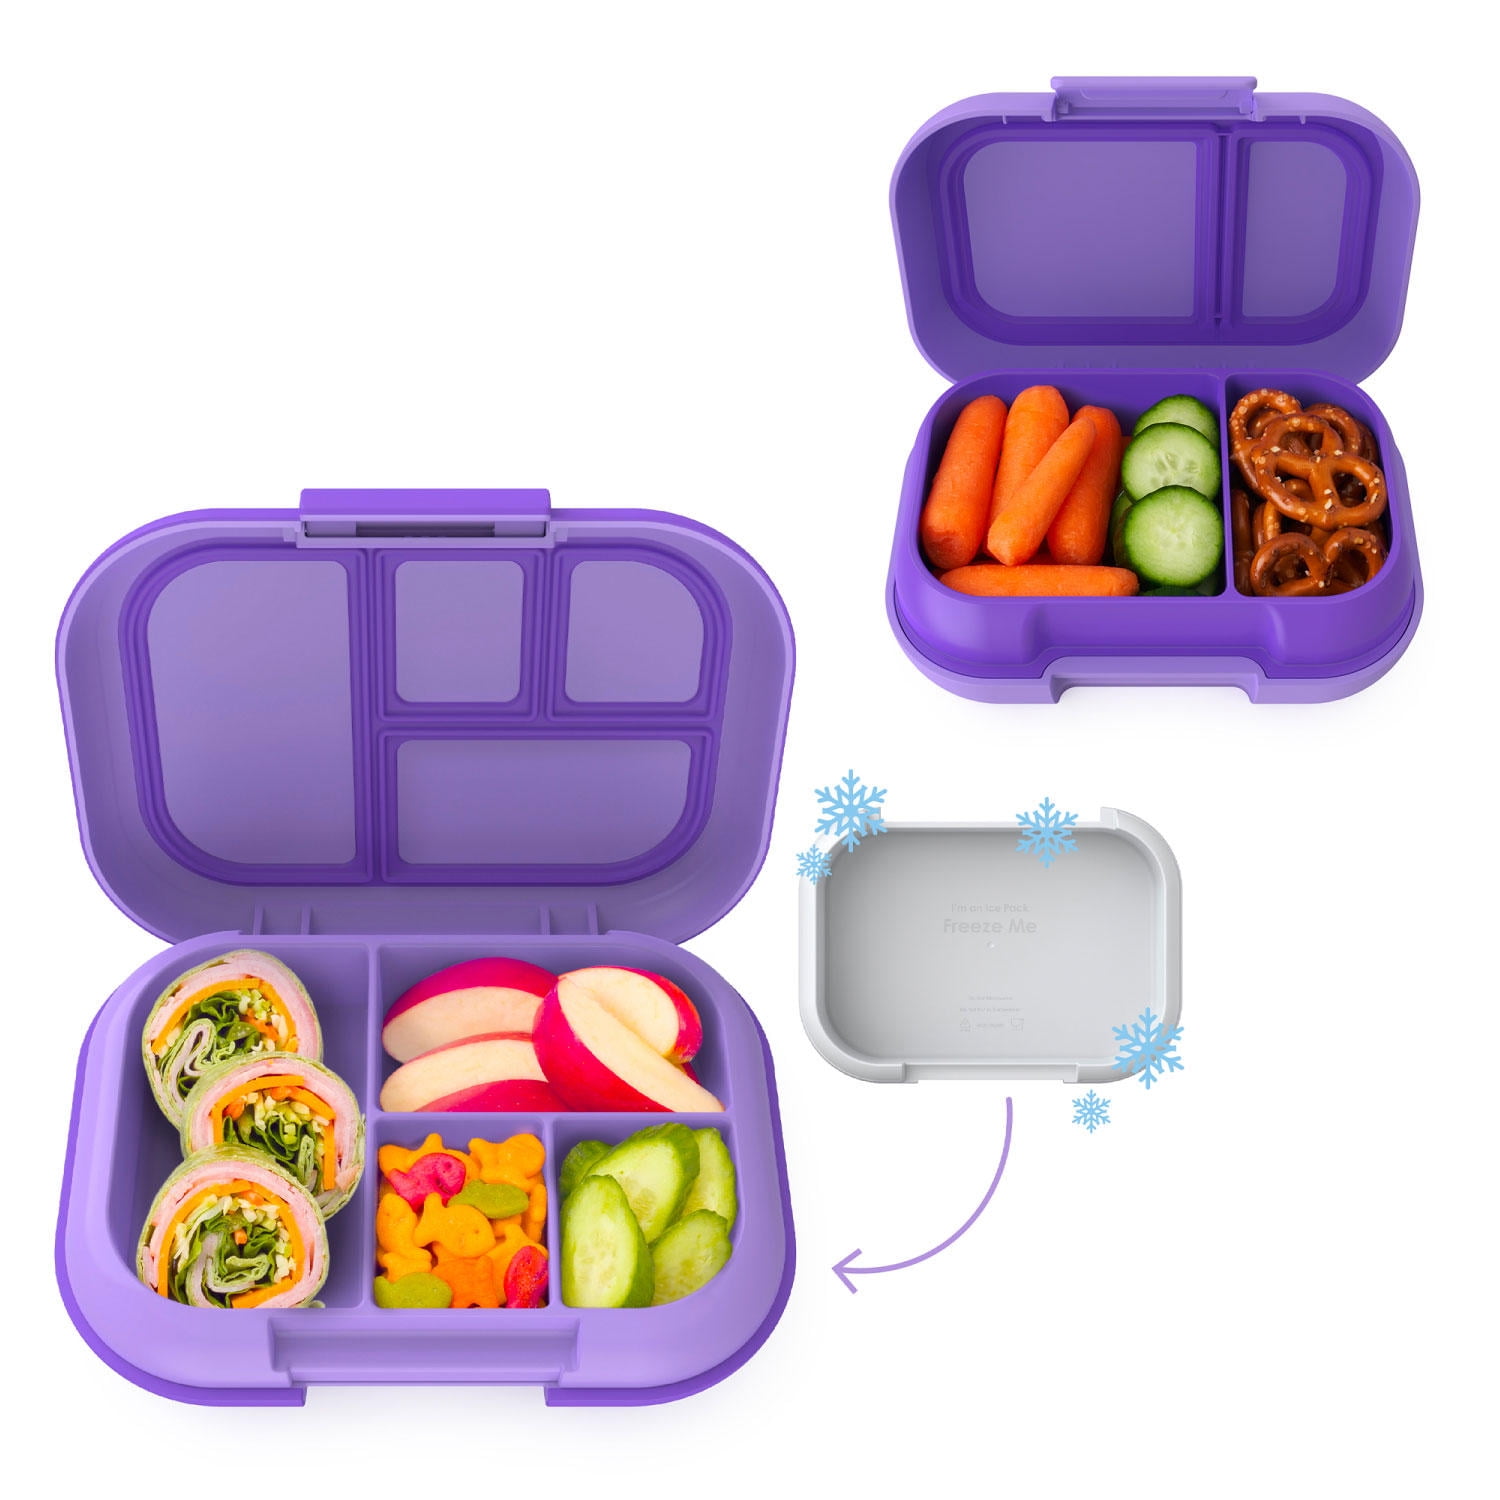 Bentgo Classic Bag (Purple) - Insulated Lunch Bag Keeps Food Cold On the Go  - Fits the Bentgo Classic Lunch Box, Bentgo Cup, Bentgo Sauce Dippers and  an Ice Pack - Works